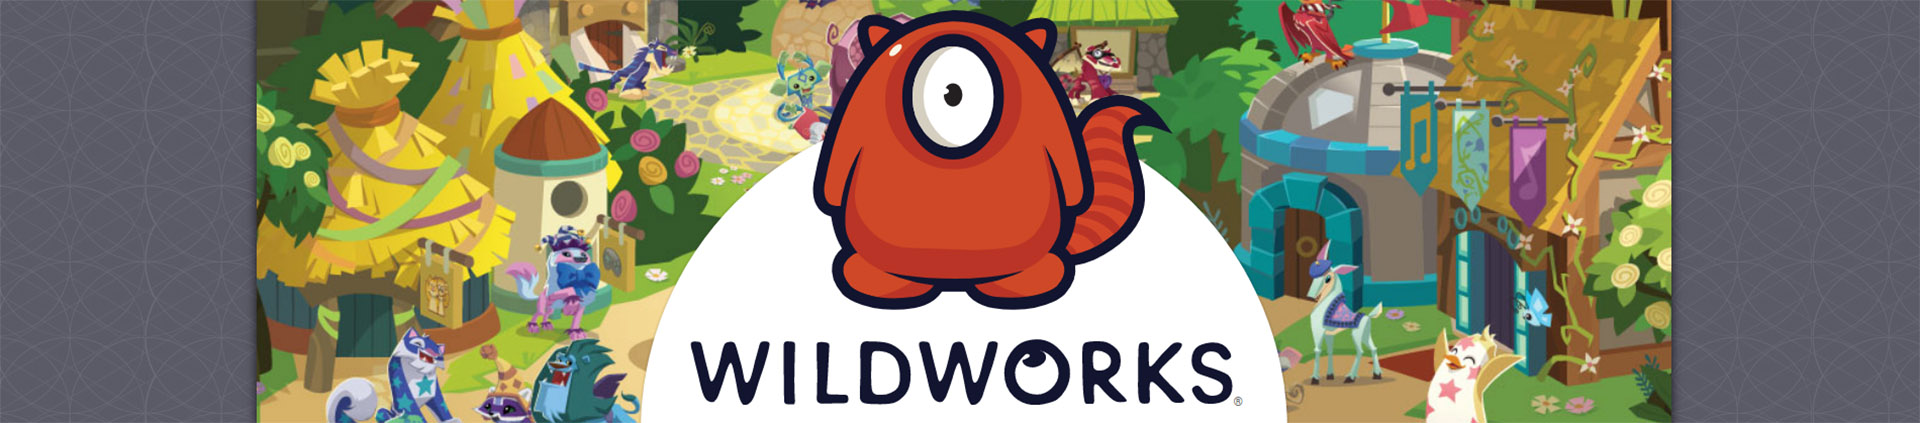 Image for WildWorks Inc.